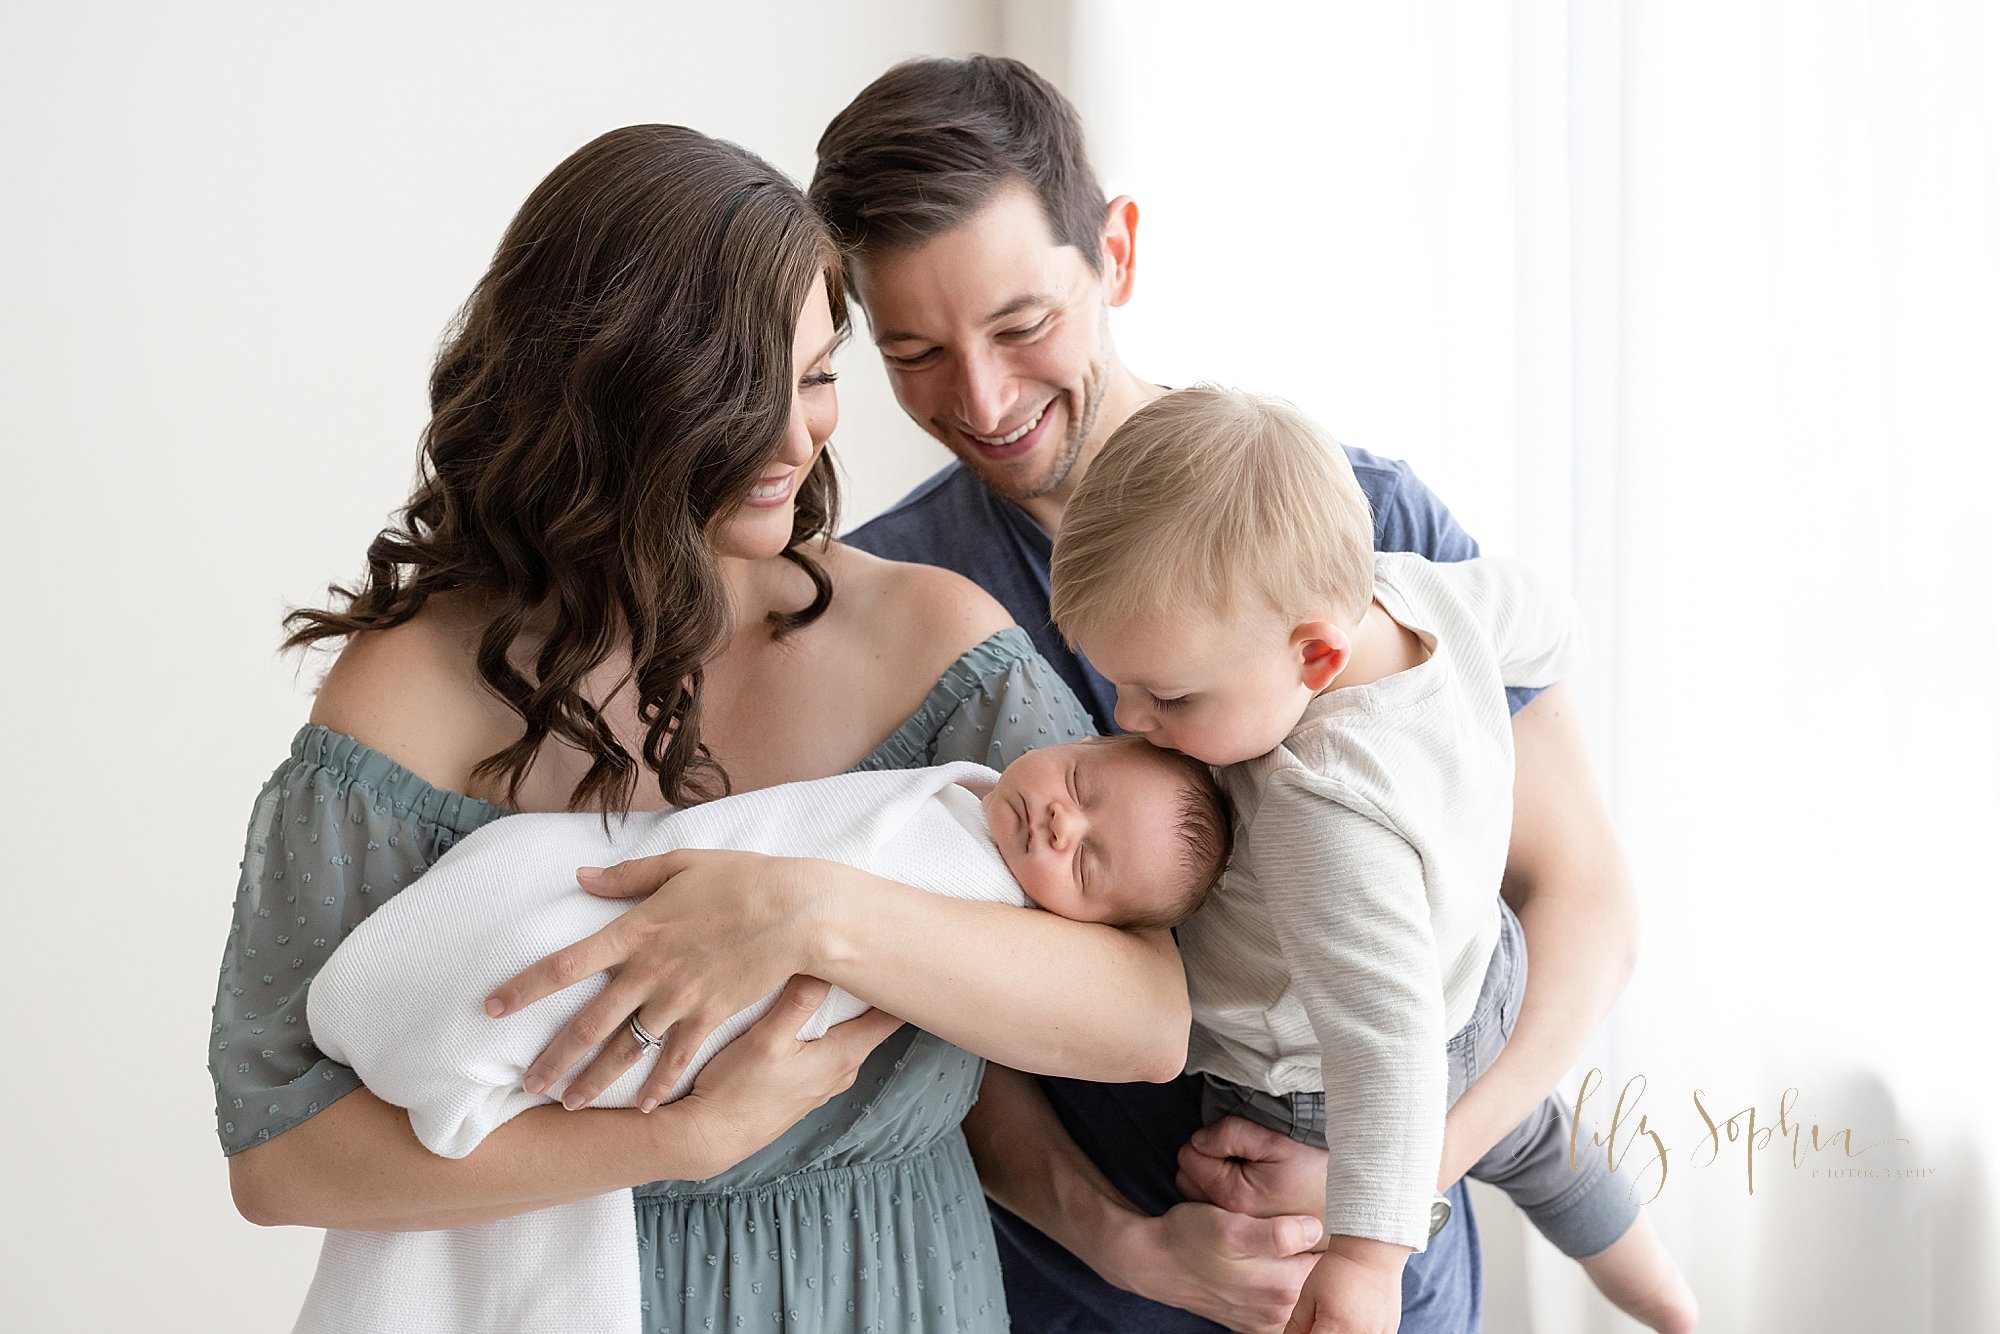  Family newborn portrait of a mother cradling her newborn baby boy in her arms as her husband stands behind and to the left of his wife as he holds their toddler son in his arms and their son kisses his brother on the head taken next to a window stre